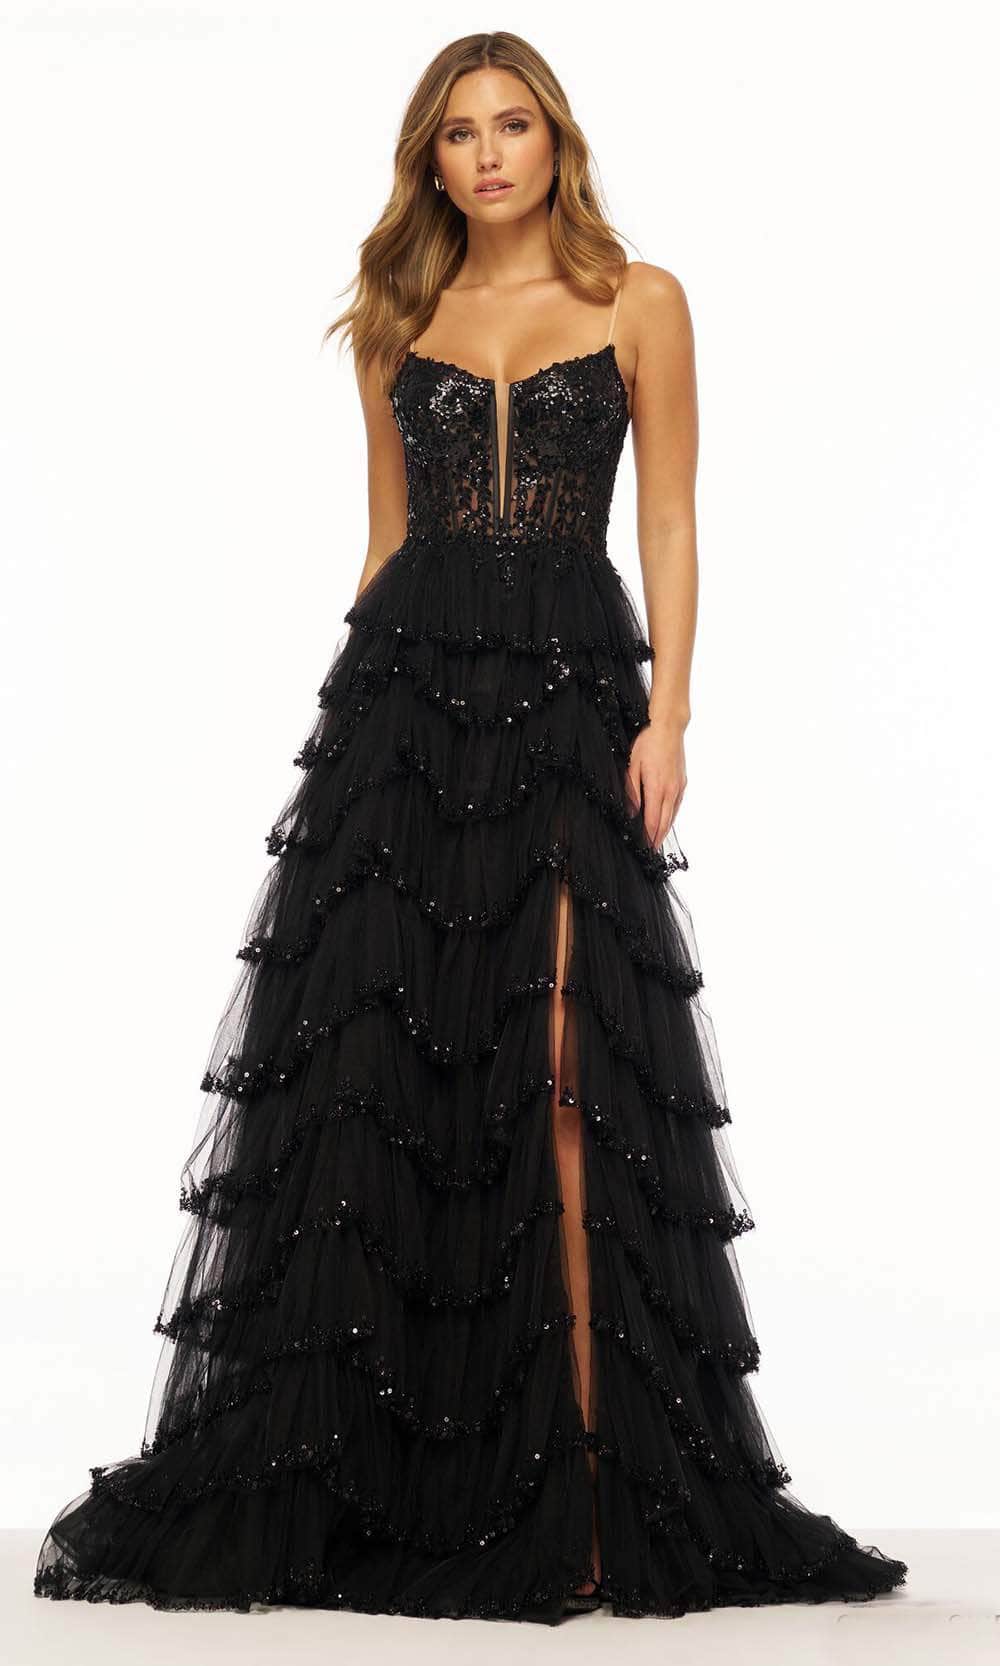 Image of Sherri Hill 56193 - Corset Beaded Gown